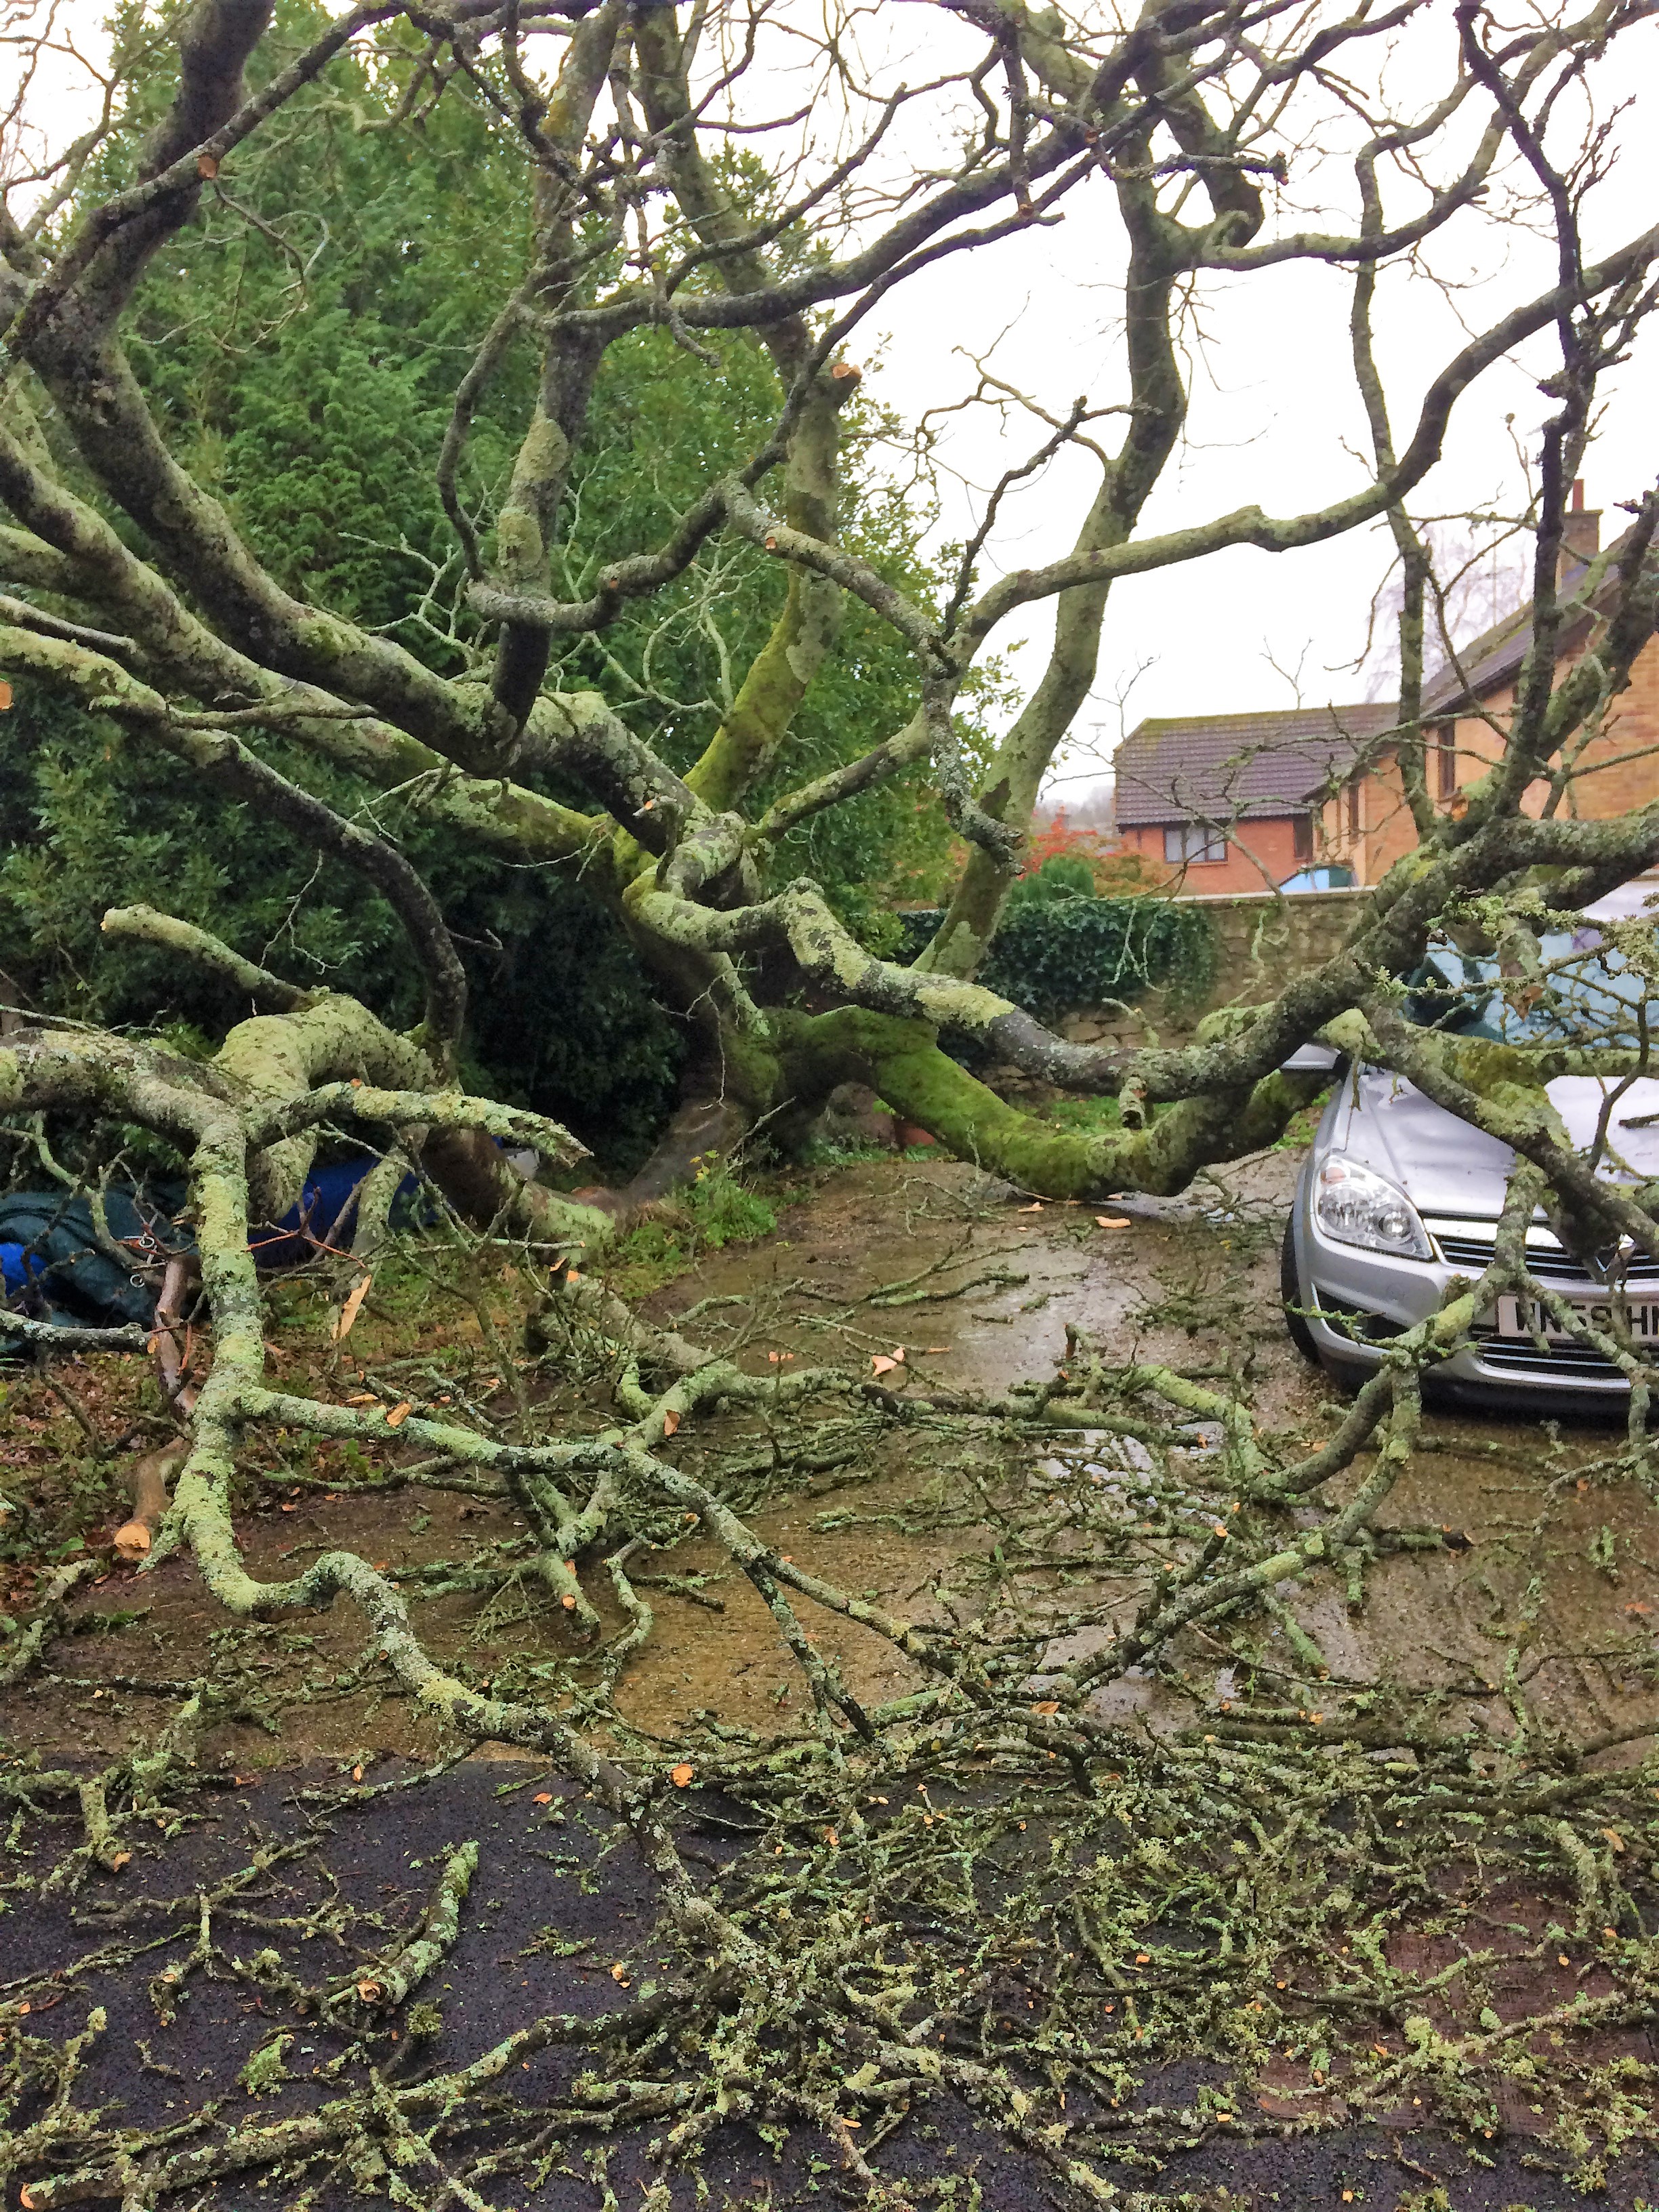 Emergency tree surgeon Weymouth, Portland, Dorchester, Dorset - Dorset Treeworx Ltd Emergency tree services to clear or make safe fallen trees, wind damage trees, uprooted trees, broken branches, split limbs.